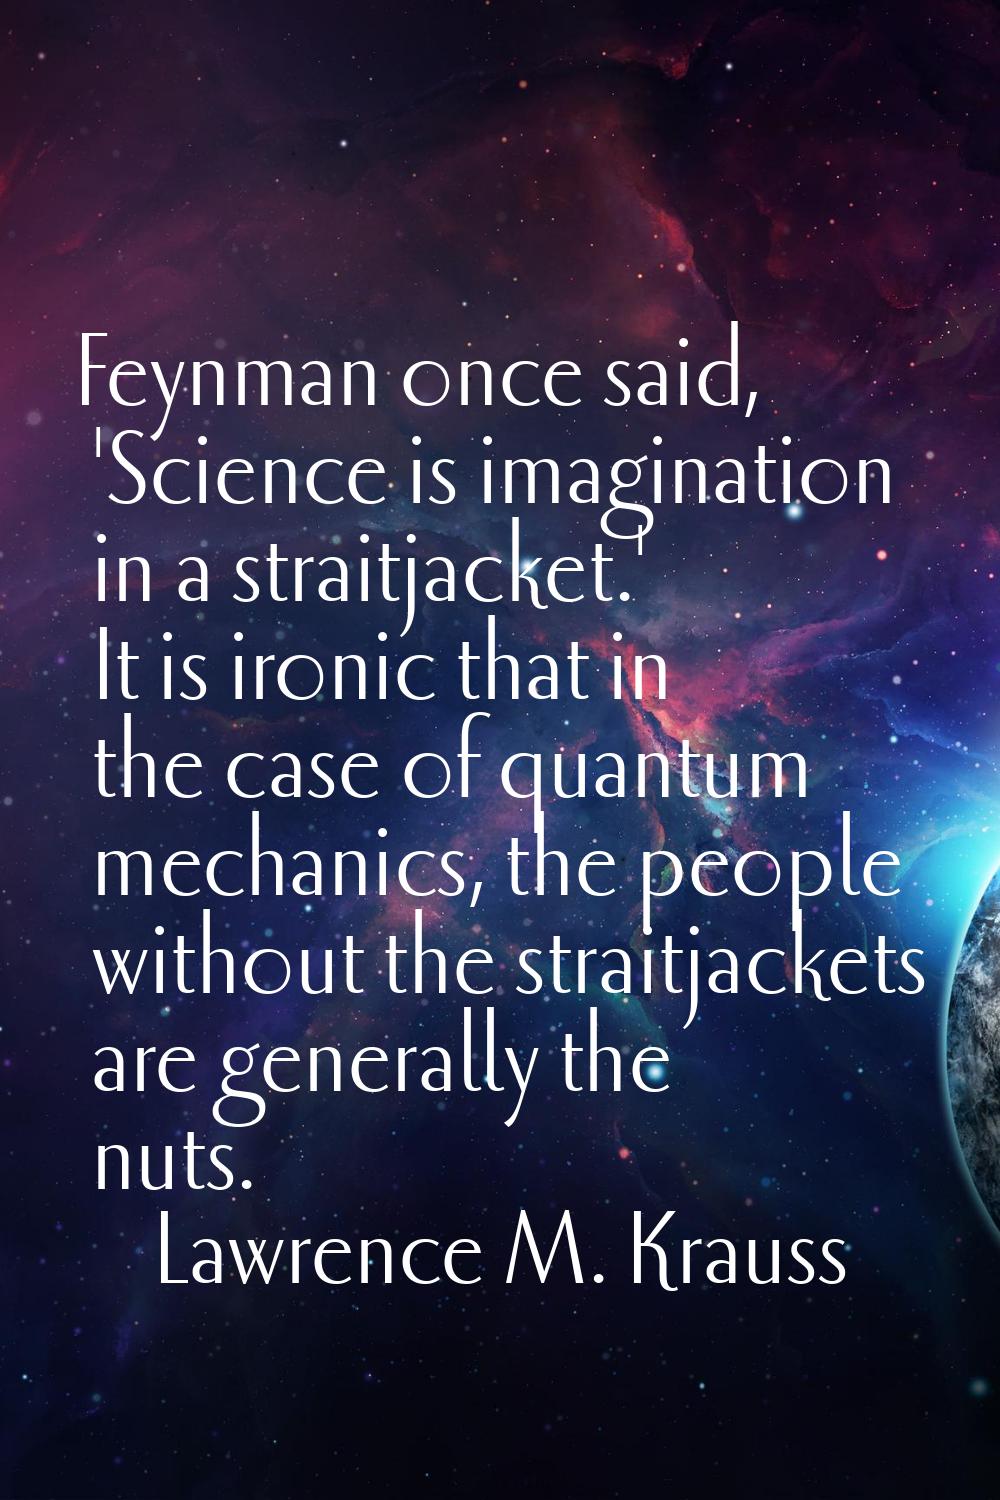 Feynman once said, 'Science is imagination in a straitjacket.' It is ironic that in the case of qua